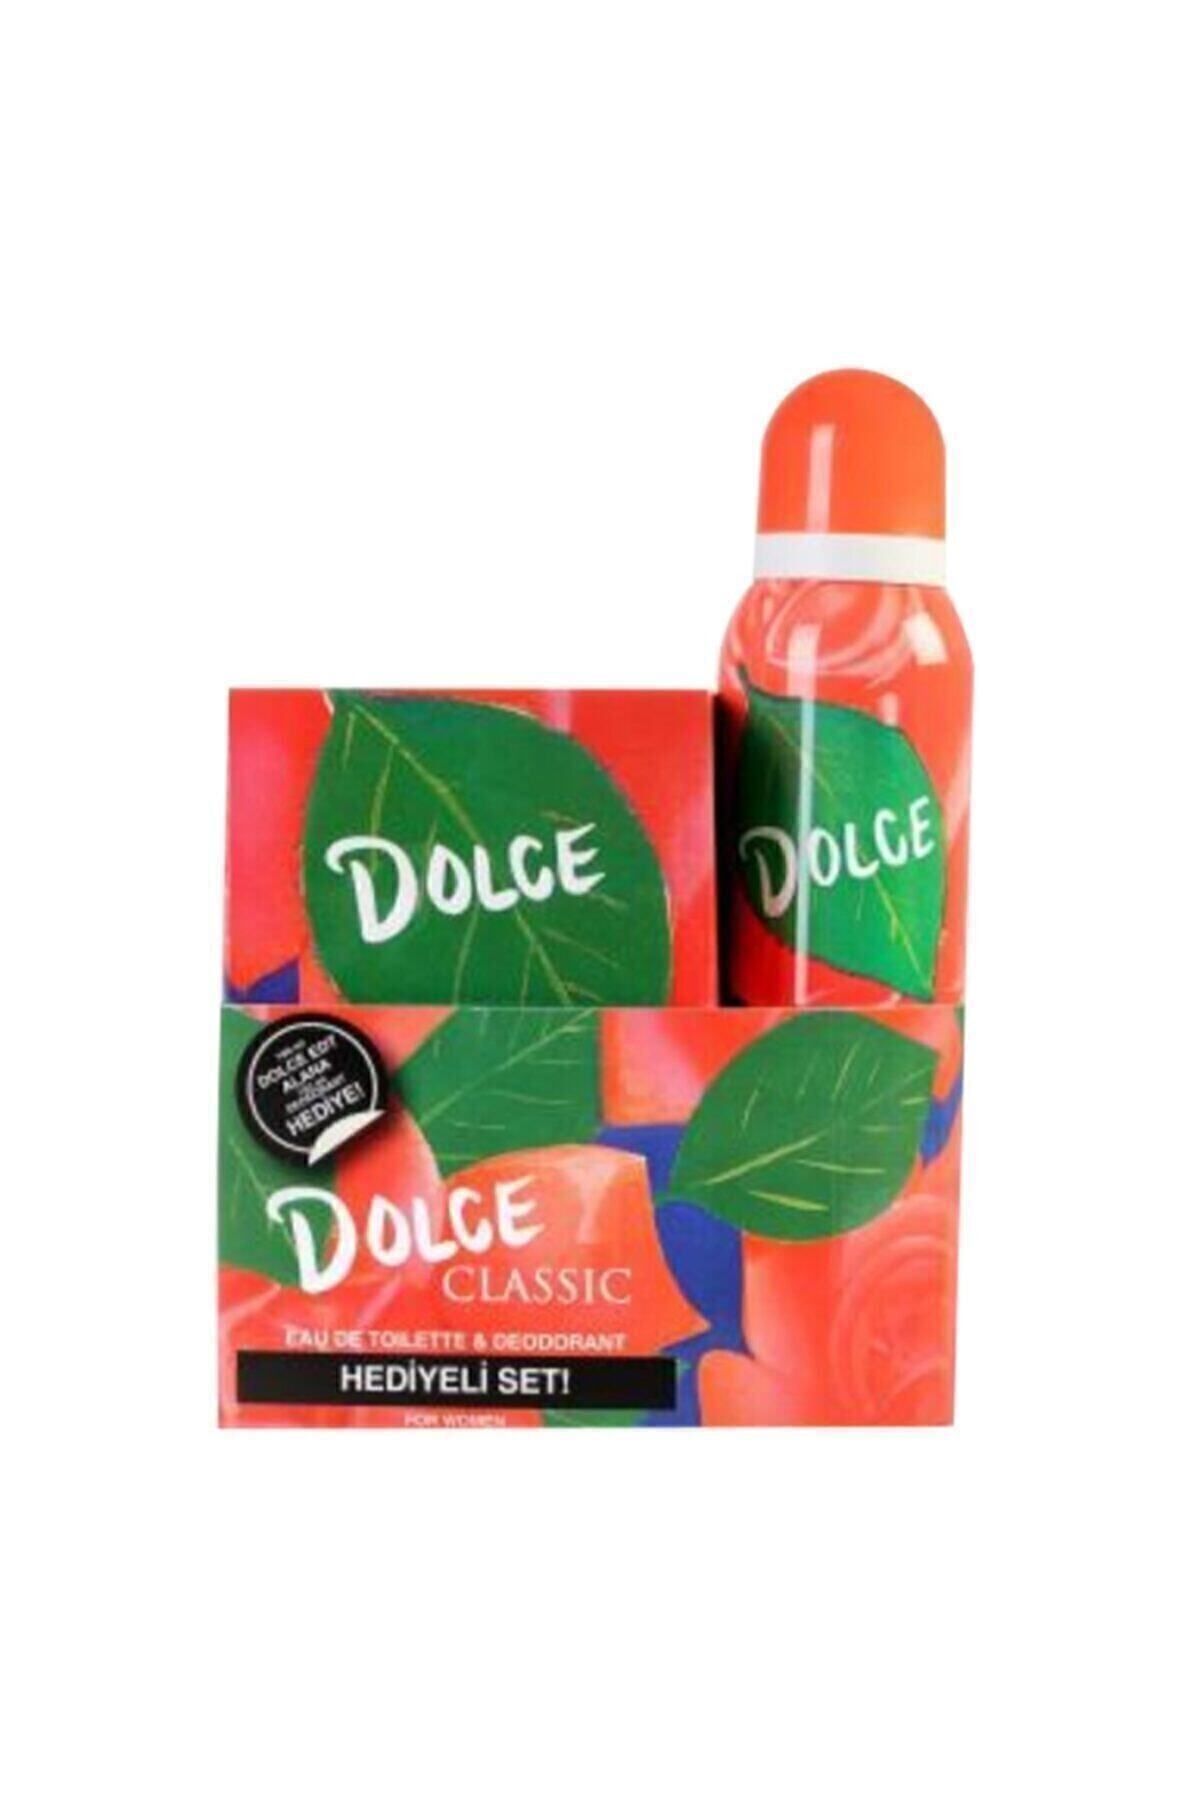 Dolce Edt Classic 100 ml Deo Kofre 100 ml